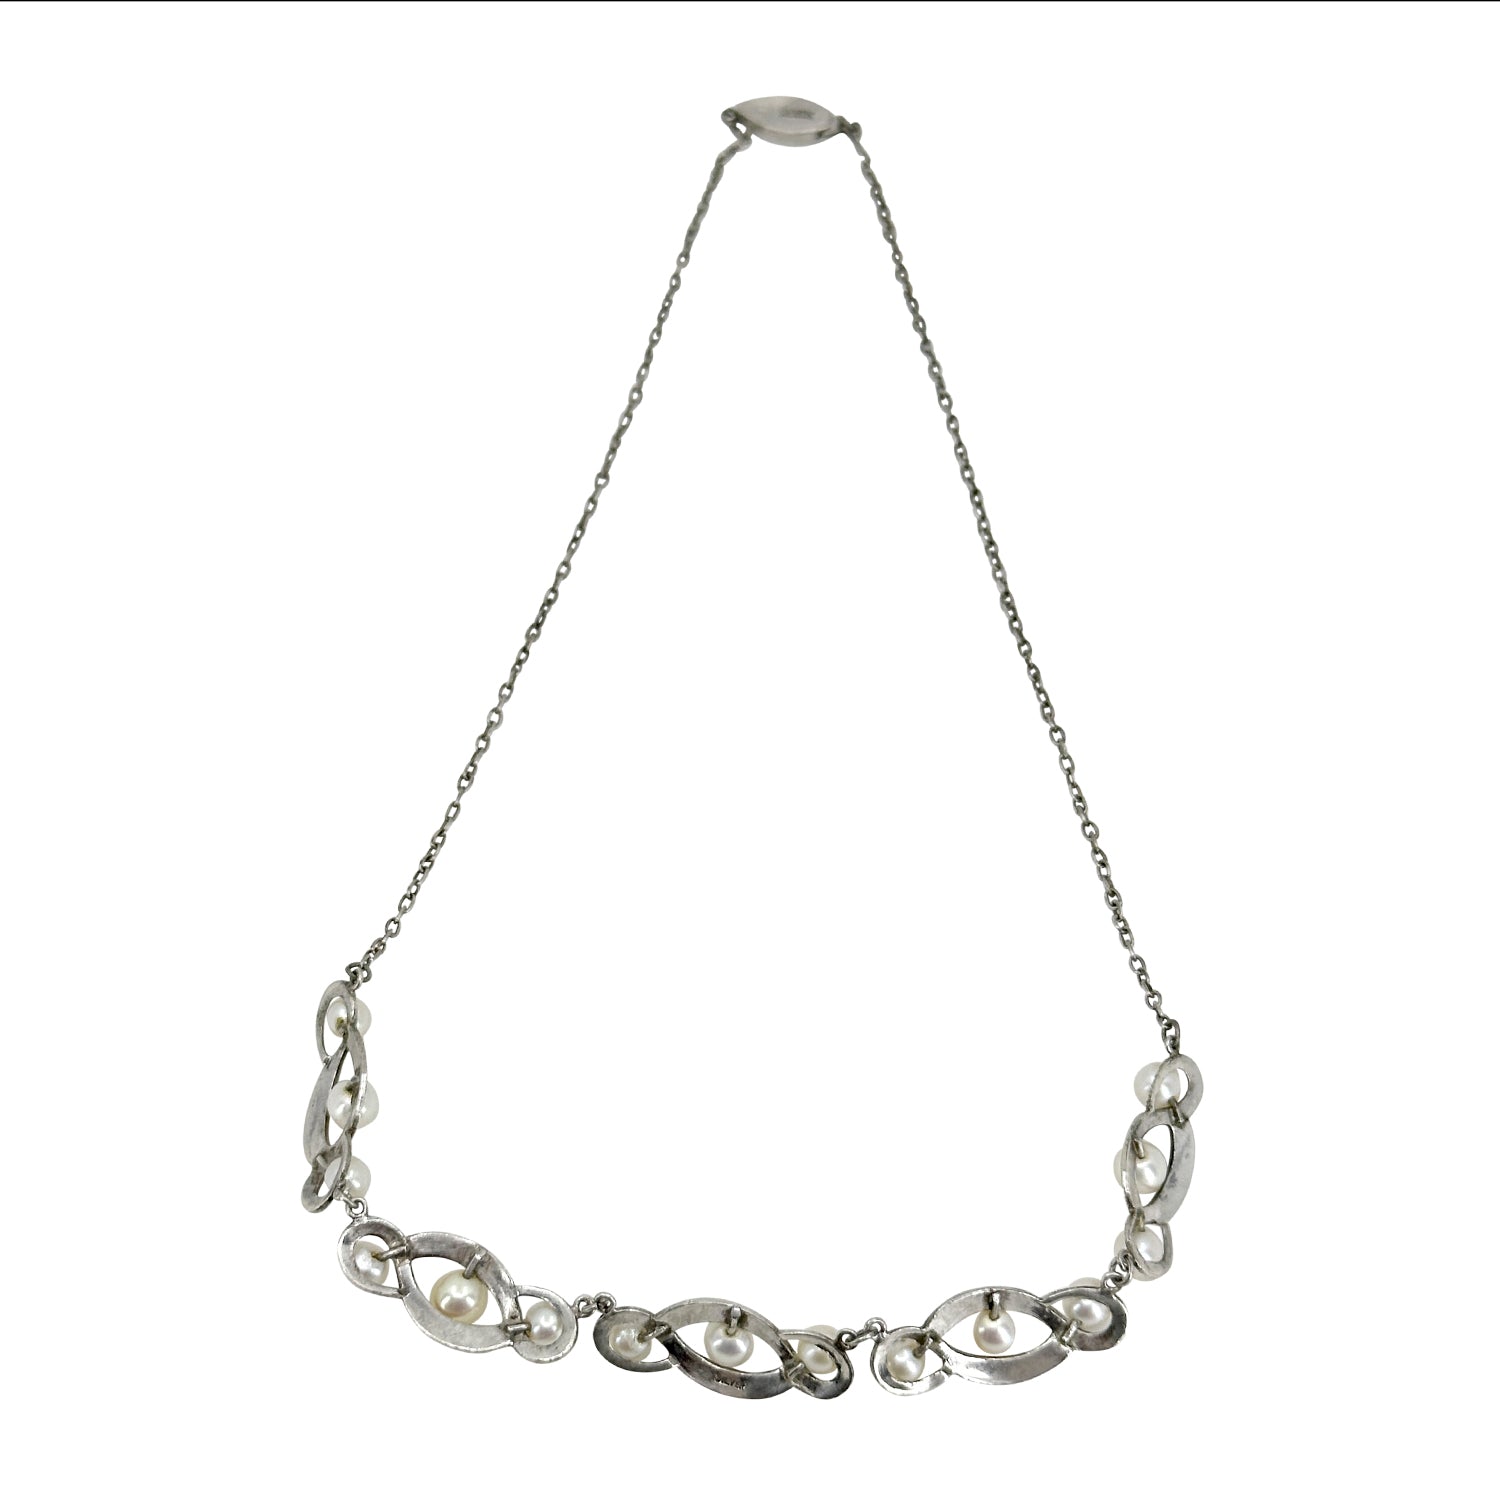 Twisted Infinity Vintage Japanese Saltwater Akoya Cultured Pearl Mid Century Necklace- Sterling Silver 16 Inch